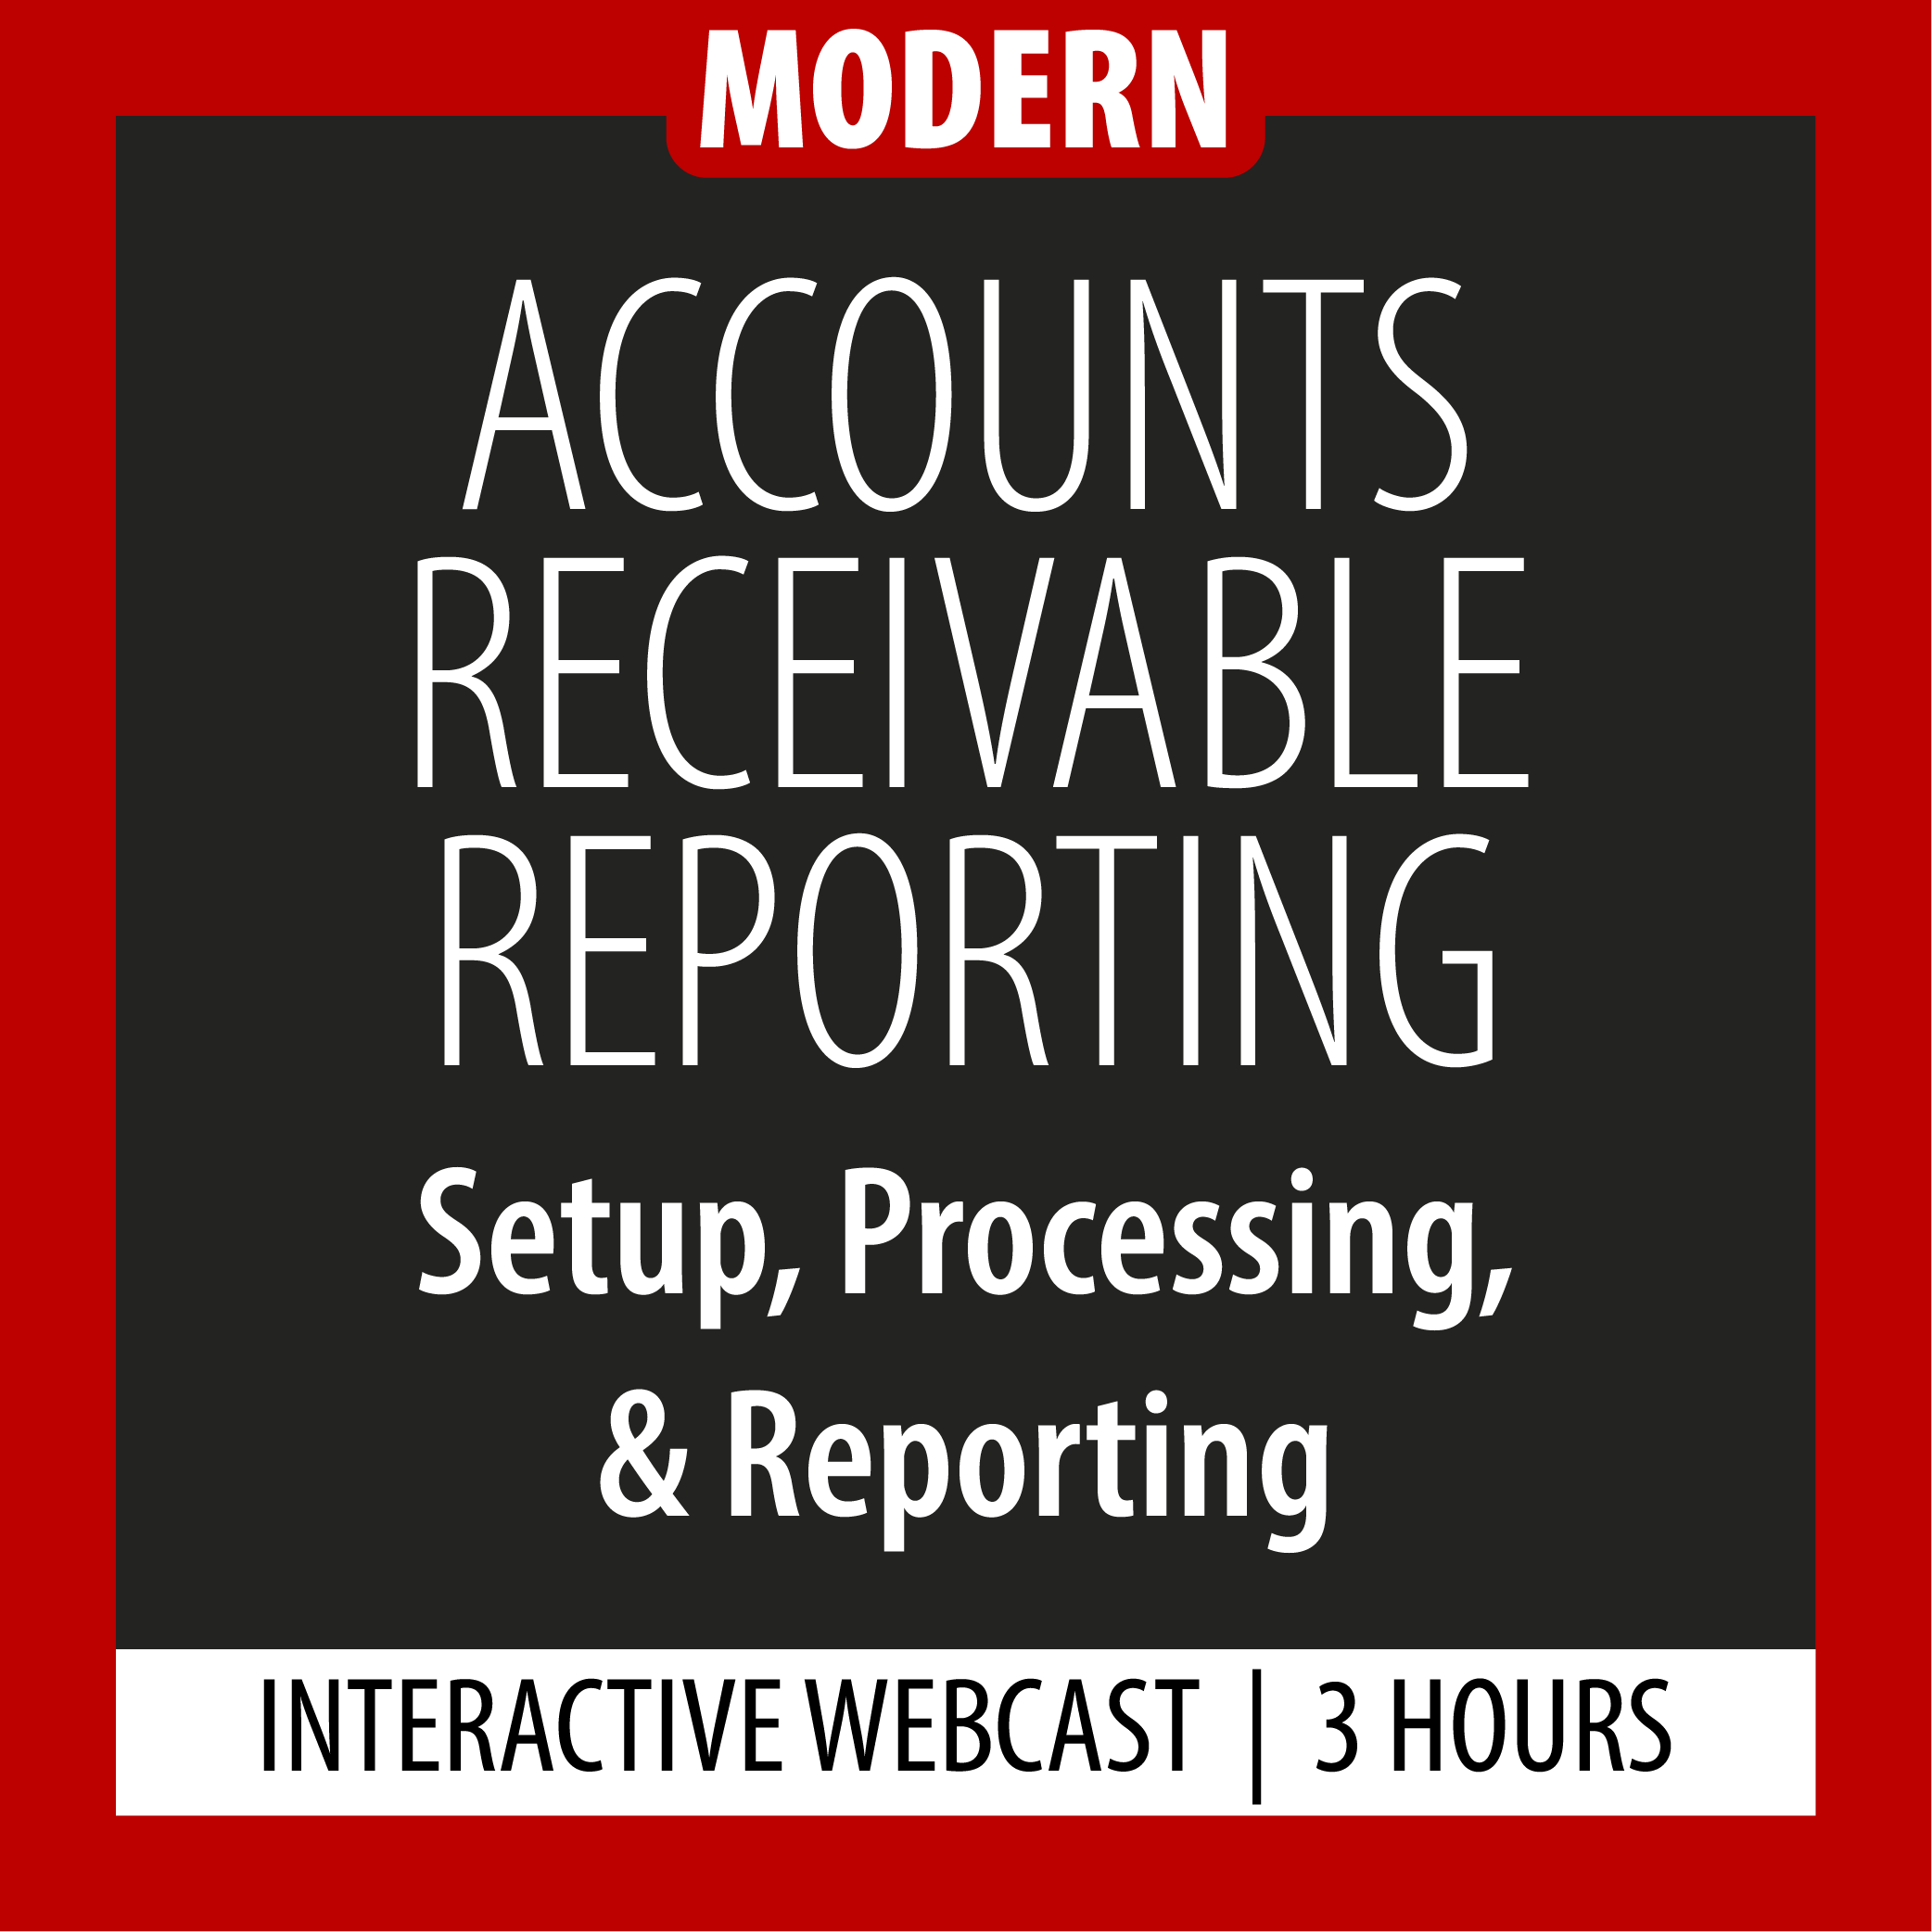 Modern - Accounts Receivable Reporting - Setup, Processing, & Reporting - Webcast - 3 Hours